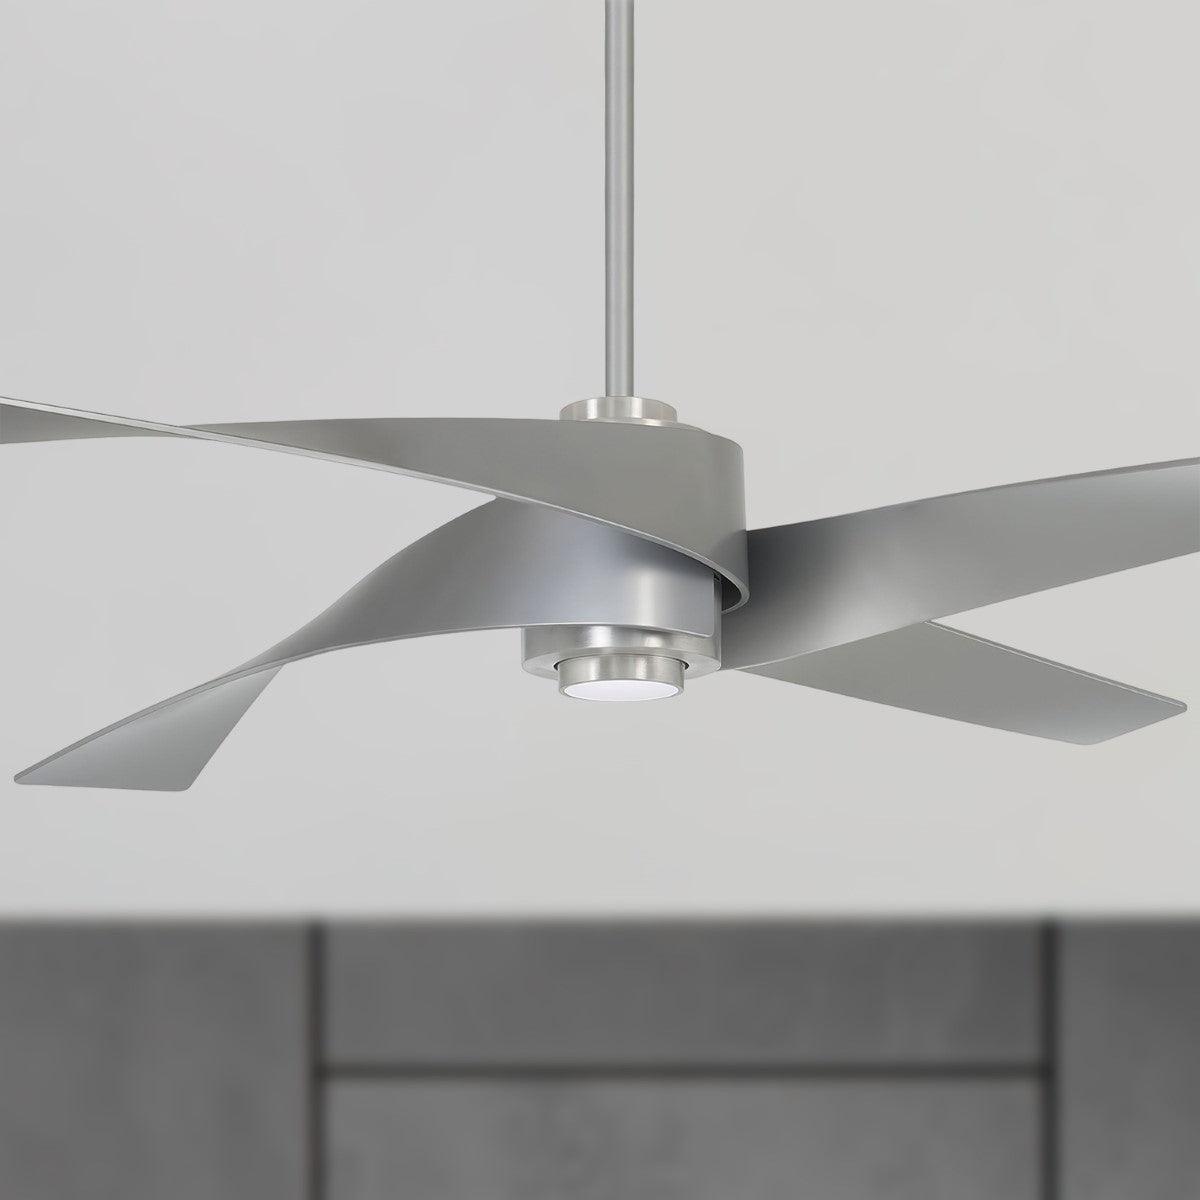 Artemis IV 64 Inch Contemporary Propeller Ceiling Fan With Light And Remote